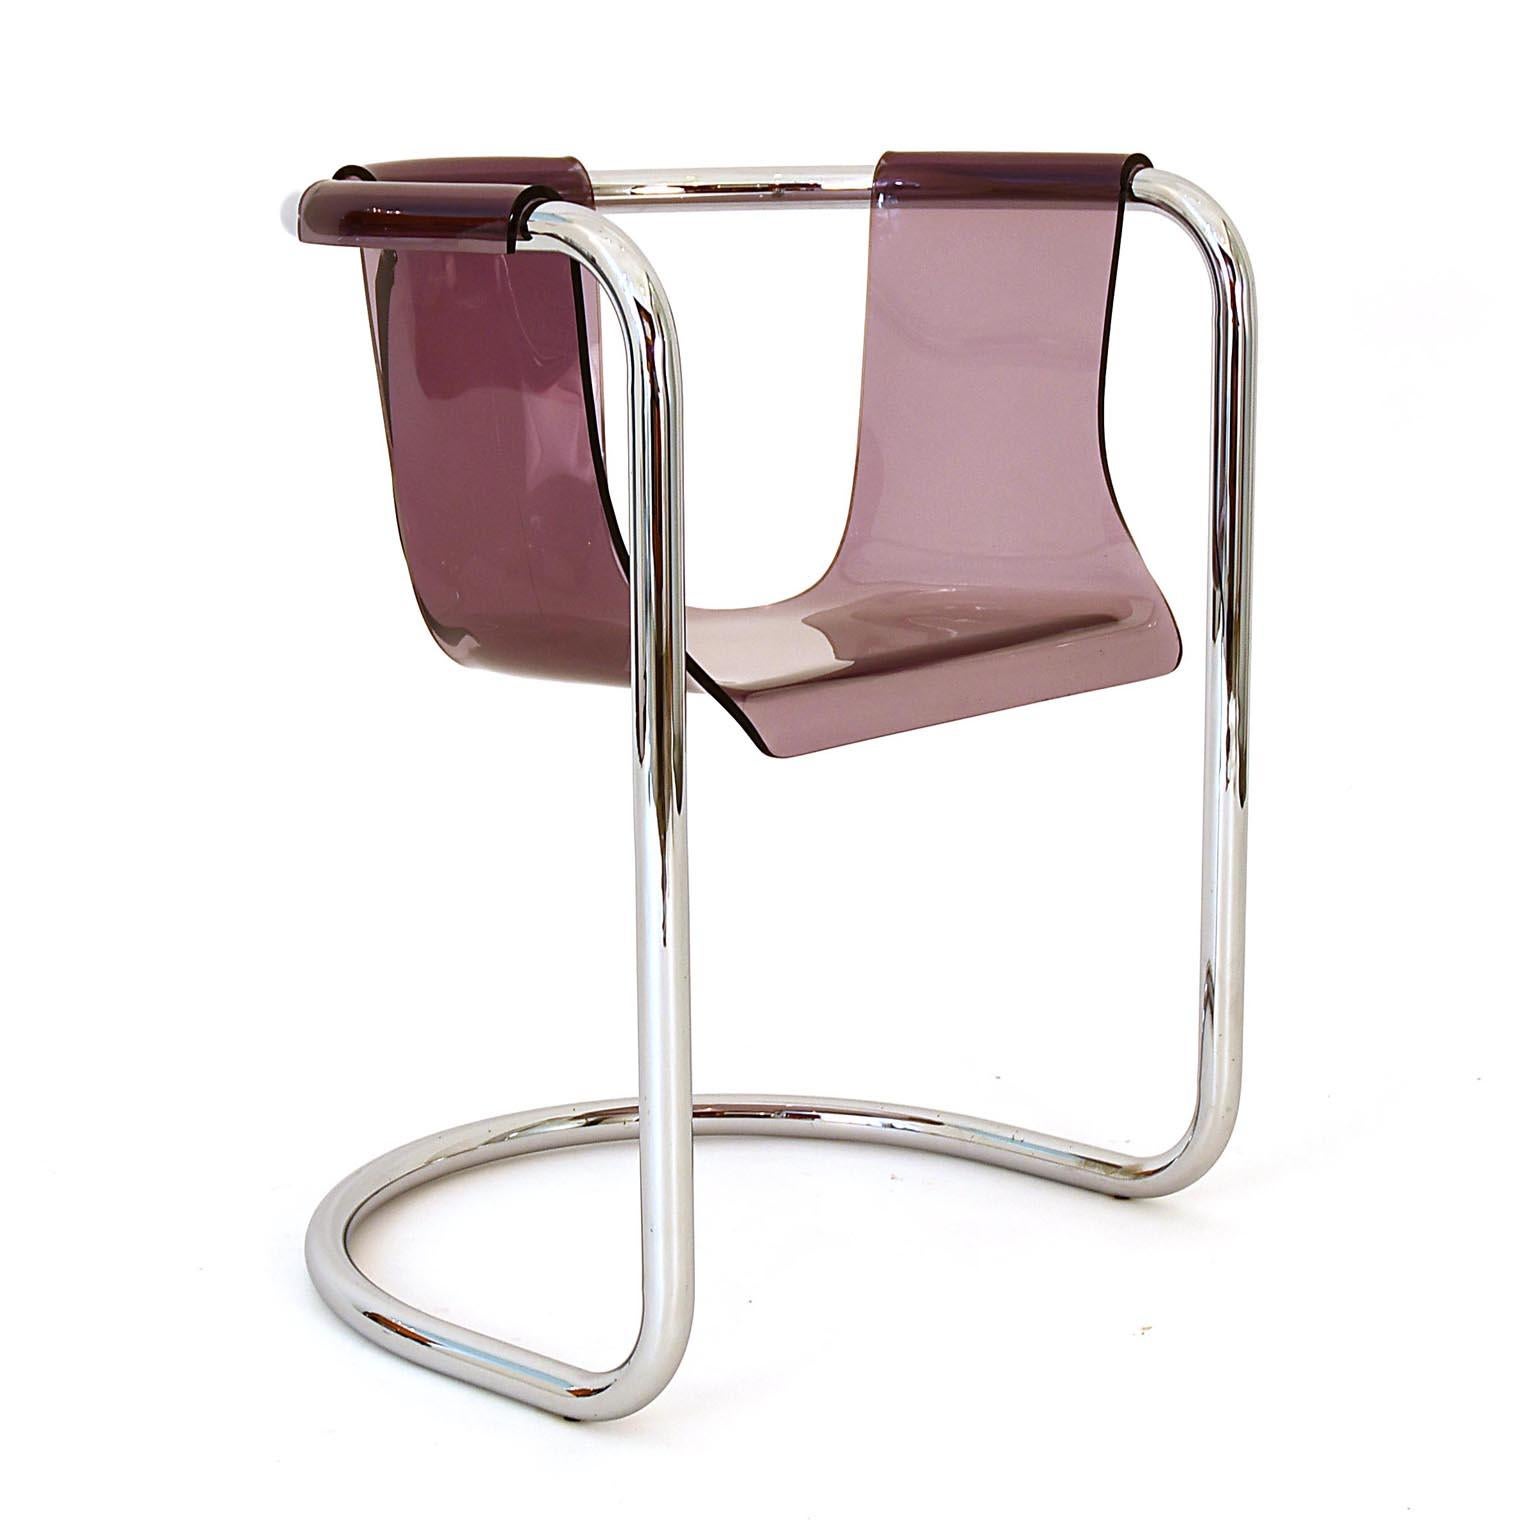 Fabio Lenci Desk with Chair and Lamp by Formes Nouvelles, 1970s Italy Chrome 6